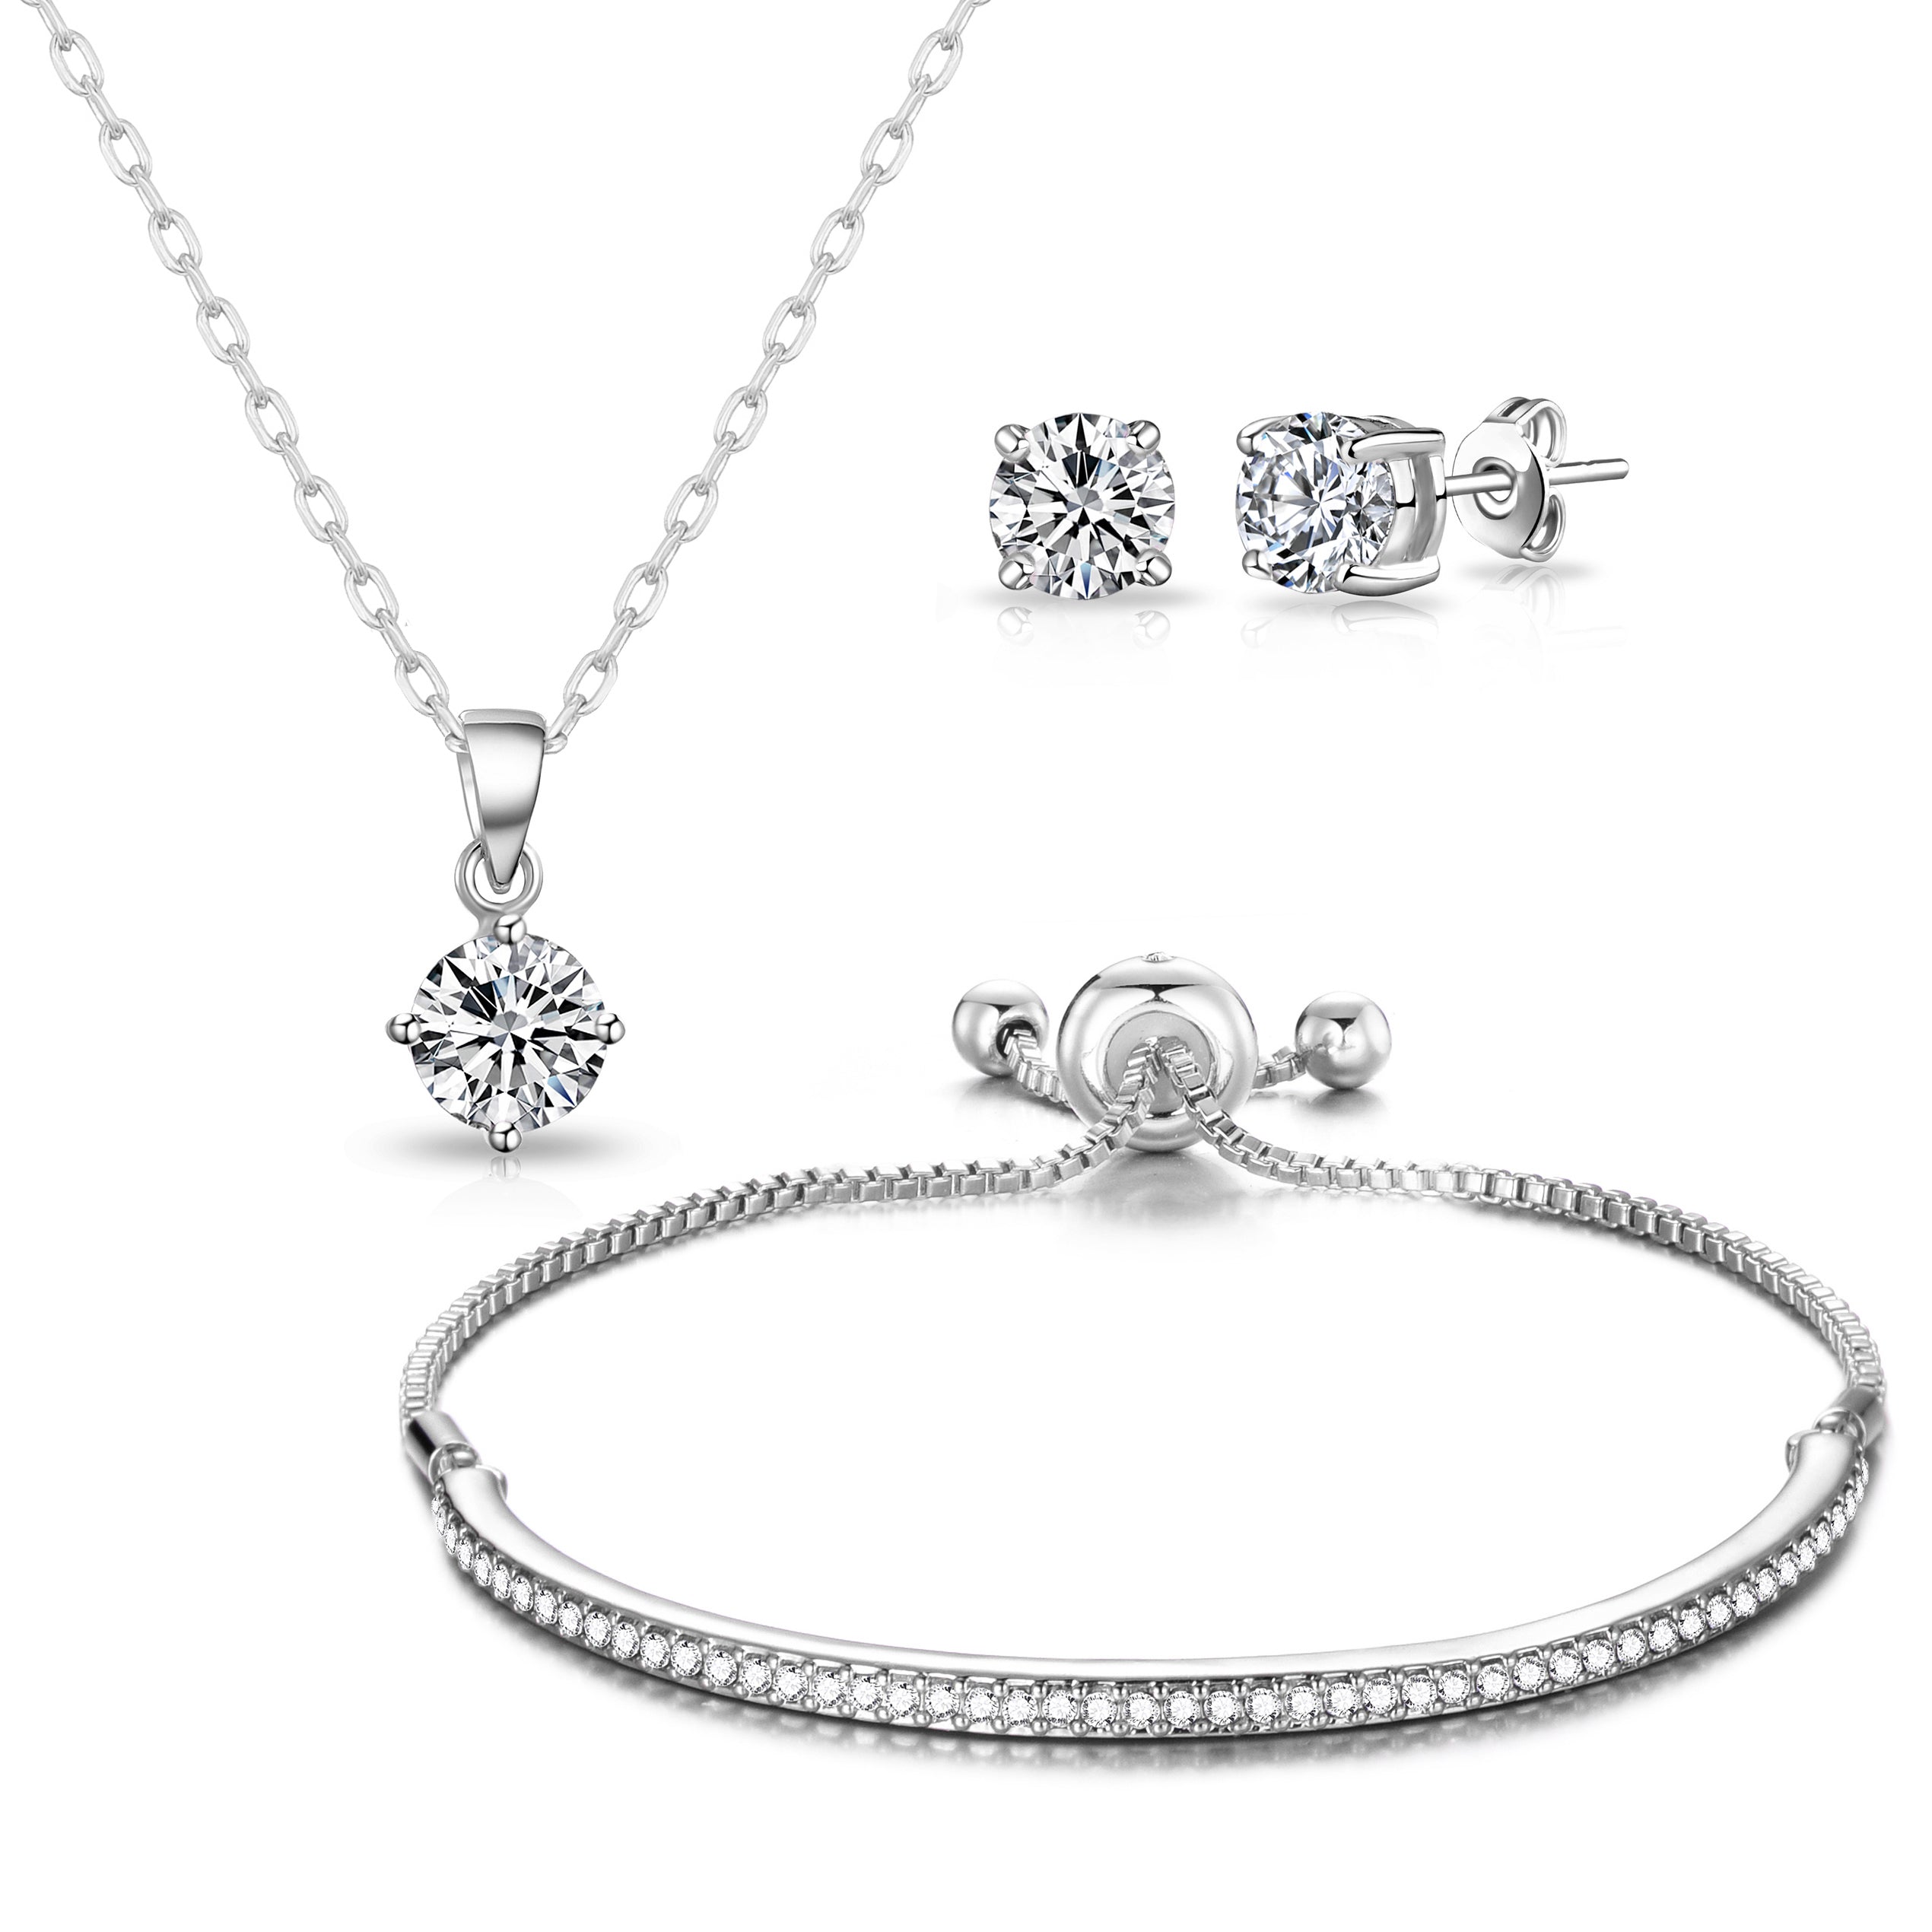 Silver Plated Friendship Set Created with Zircondia® Crystals by Philip Jones Jewellery